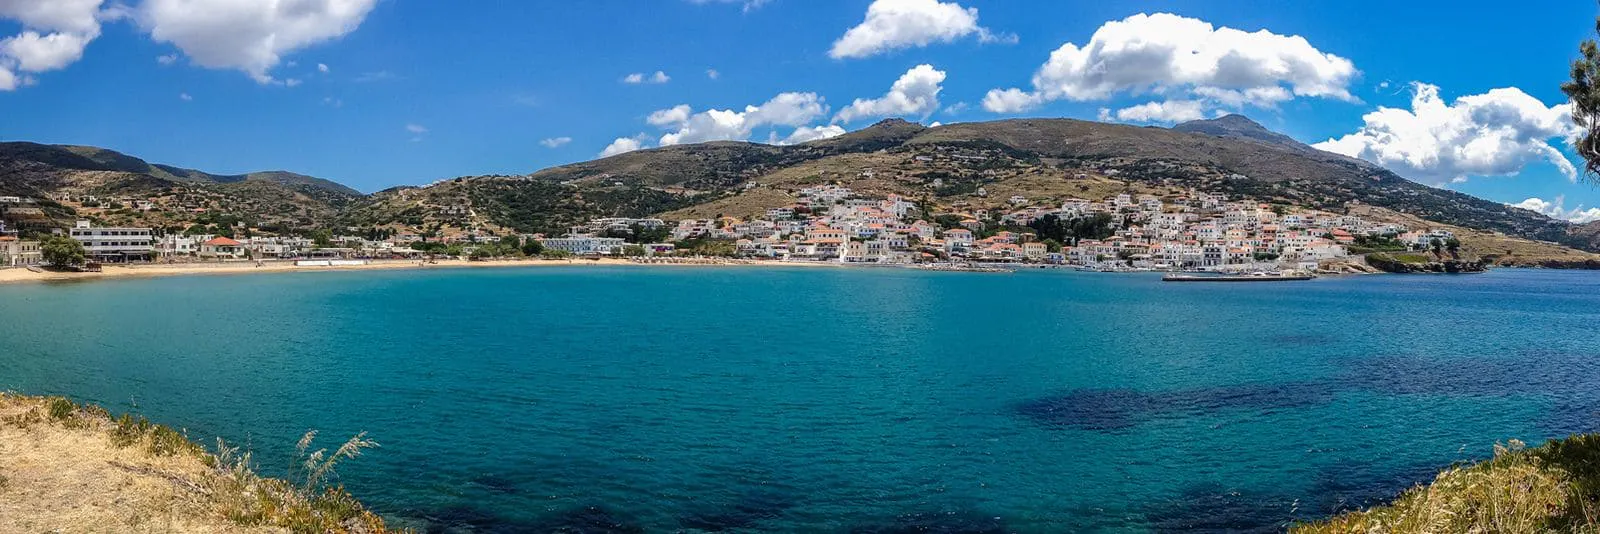 Andros - The Aegean Islands